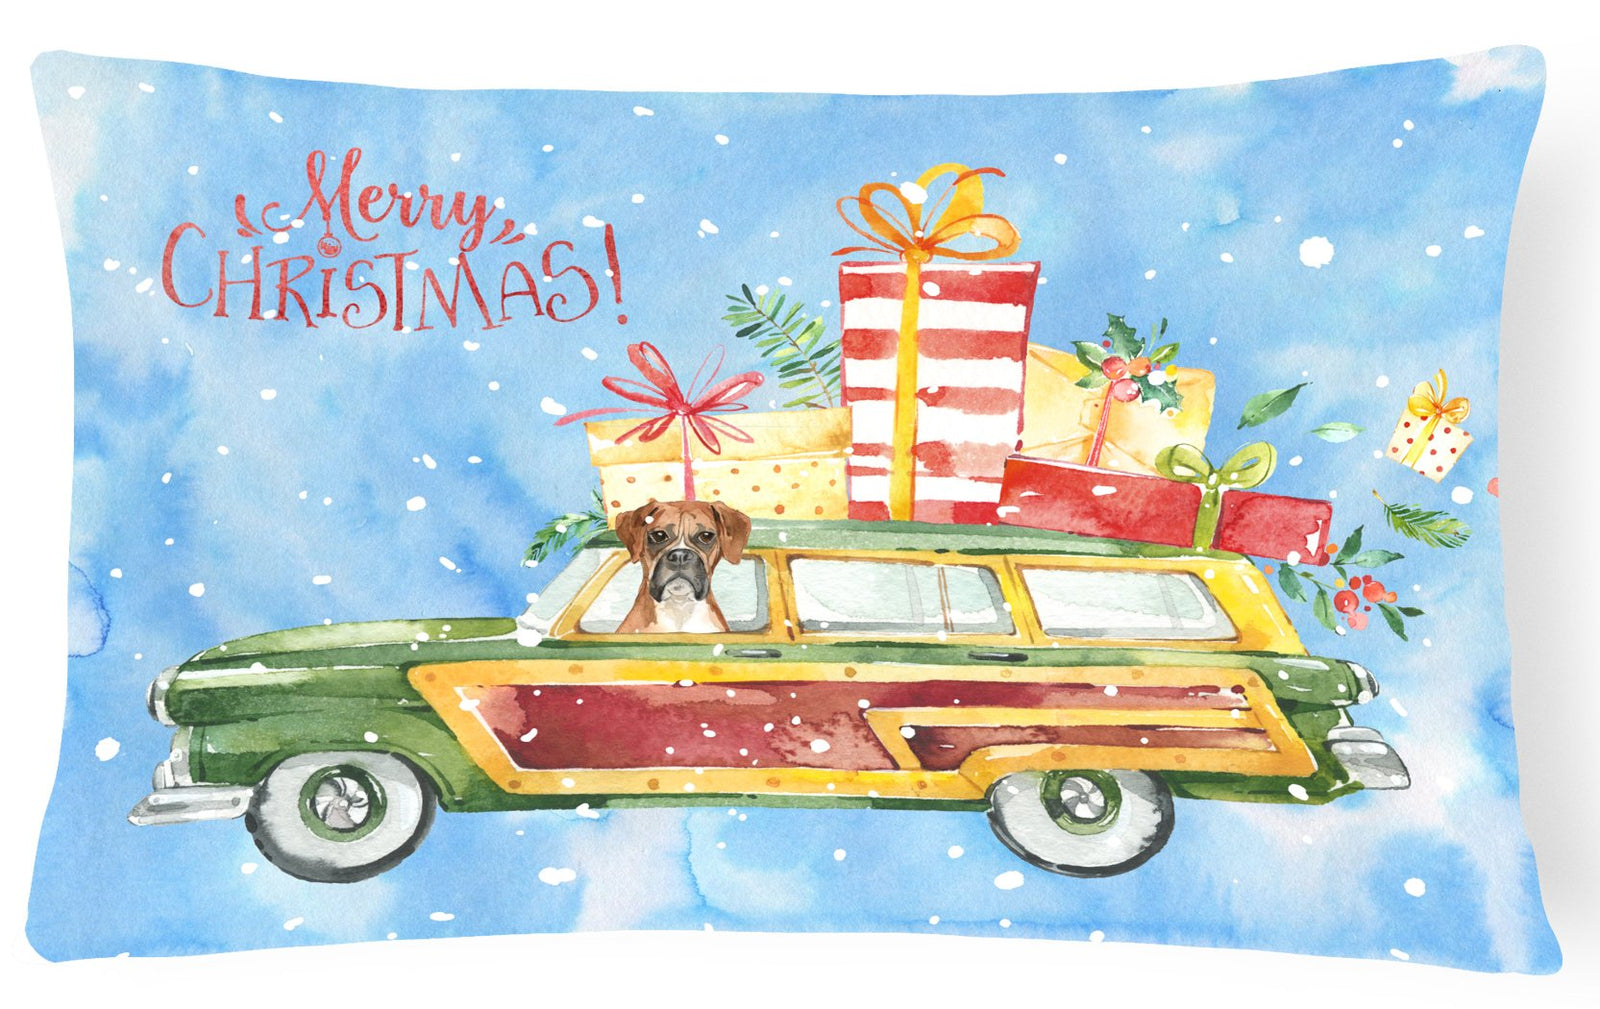 Merry Christmas Boxer Canvas Fabric Decorative Pillow CK2399PW1216 by Caroline's Treasures